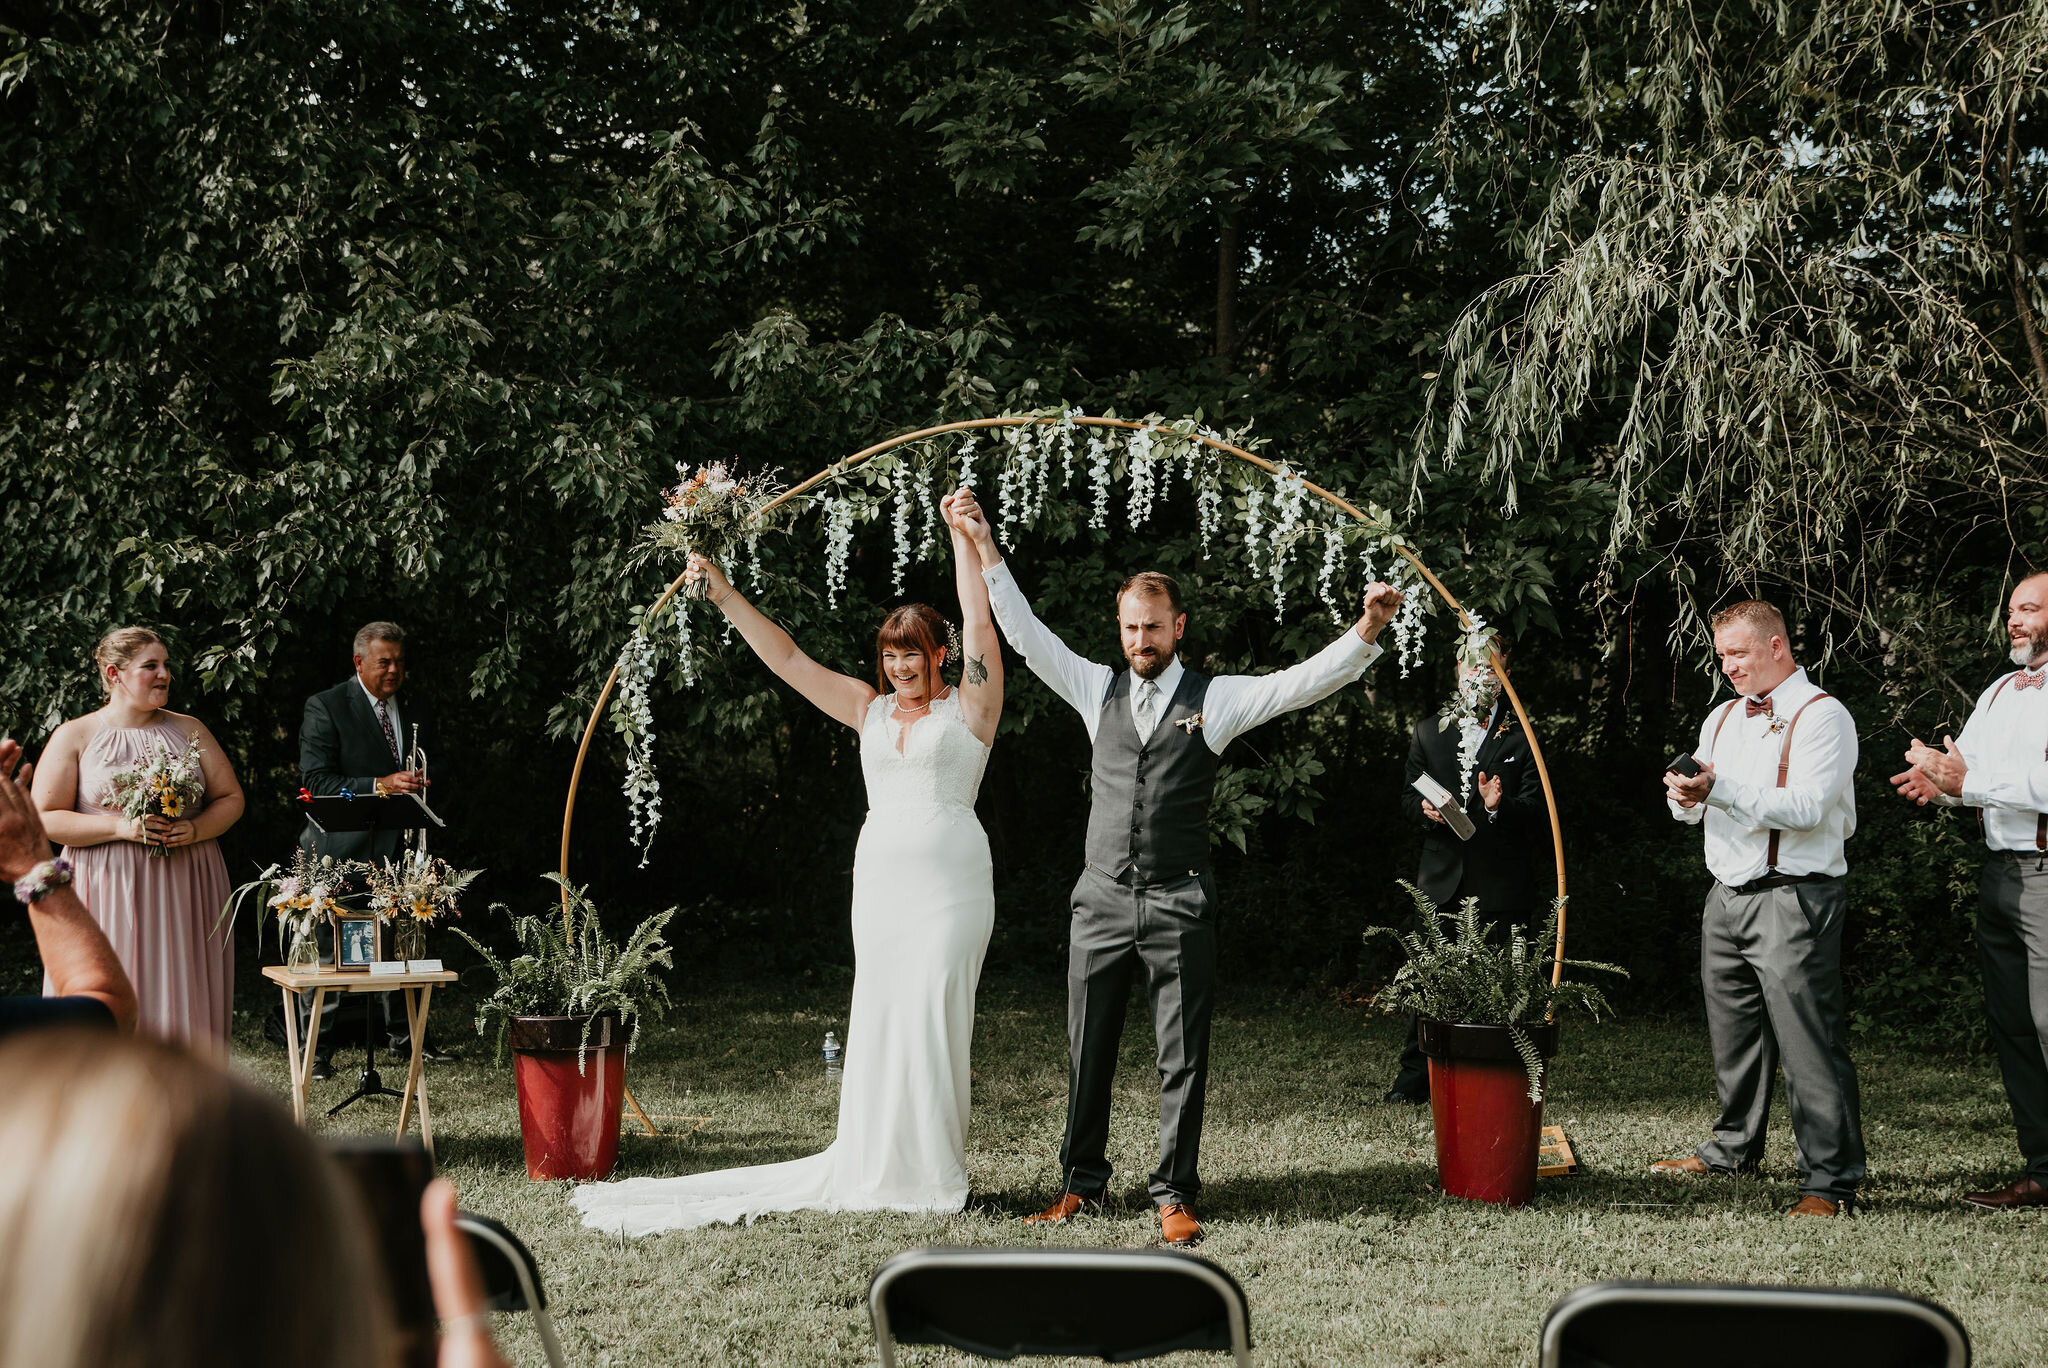 This bucks county, Pennsylvania backyard wedding turned out more perfect then imagined for Lauren an John who decided to elope this summer at home with their closest friends and family. Photographed by Rachel Betson Photography